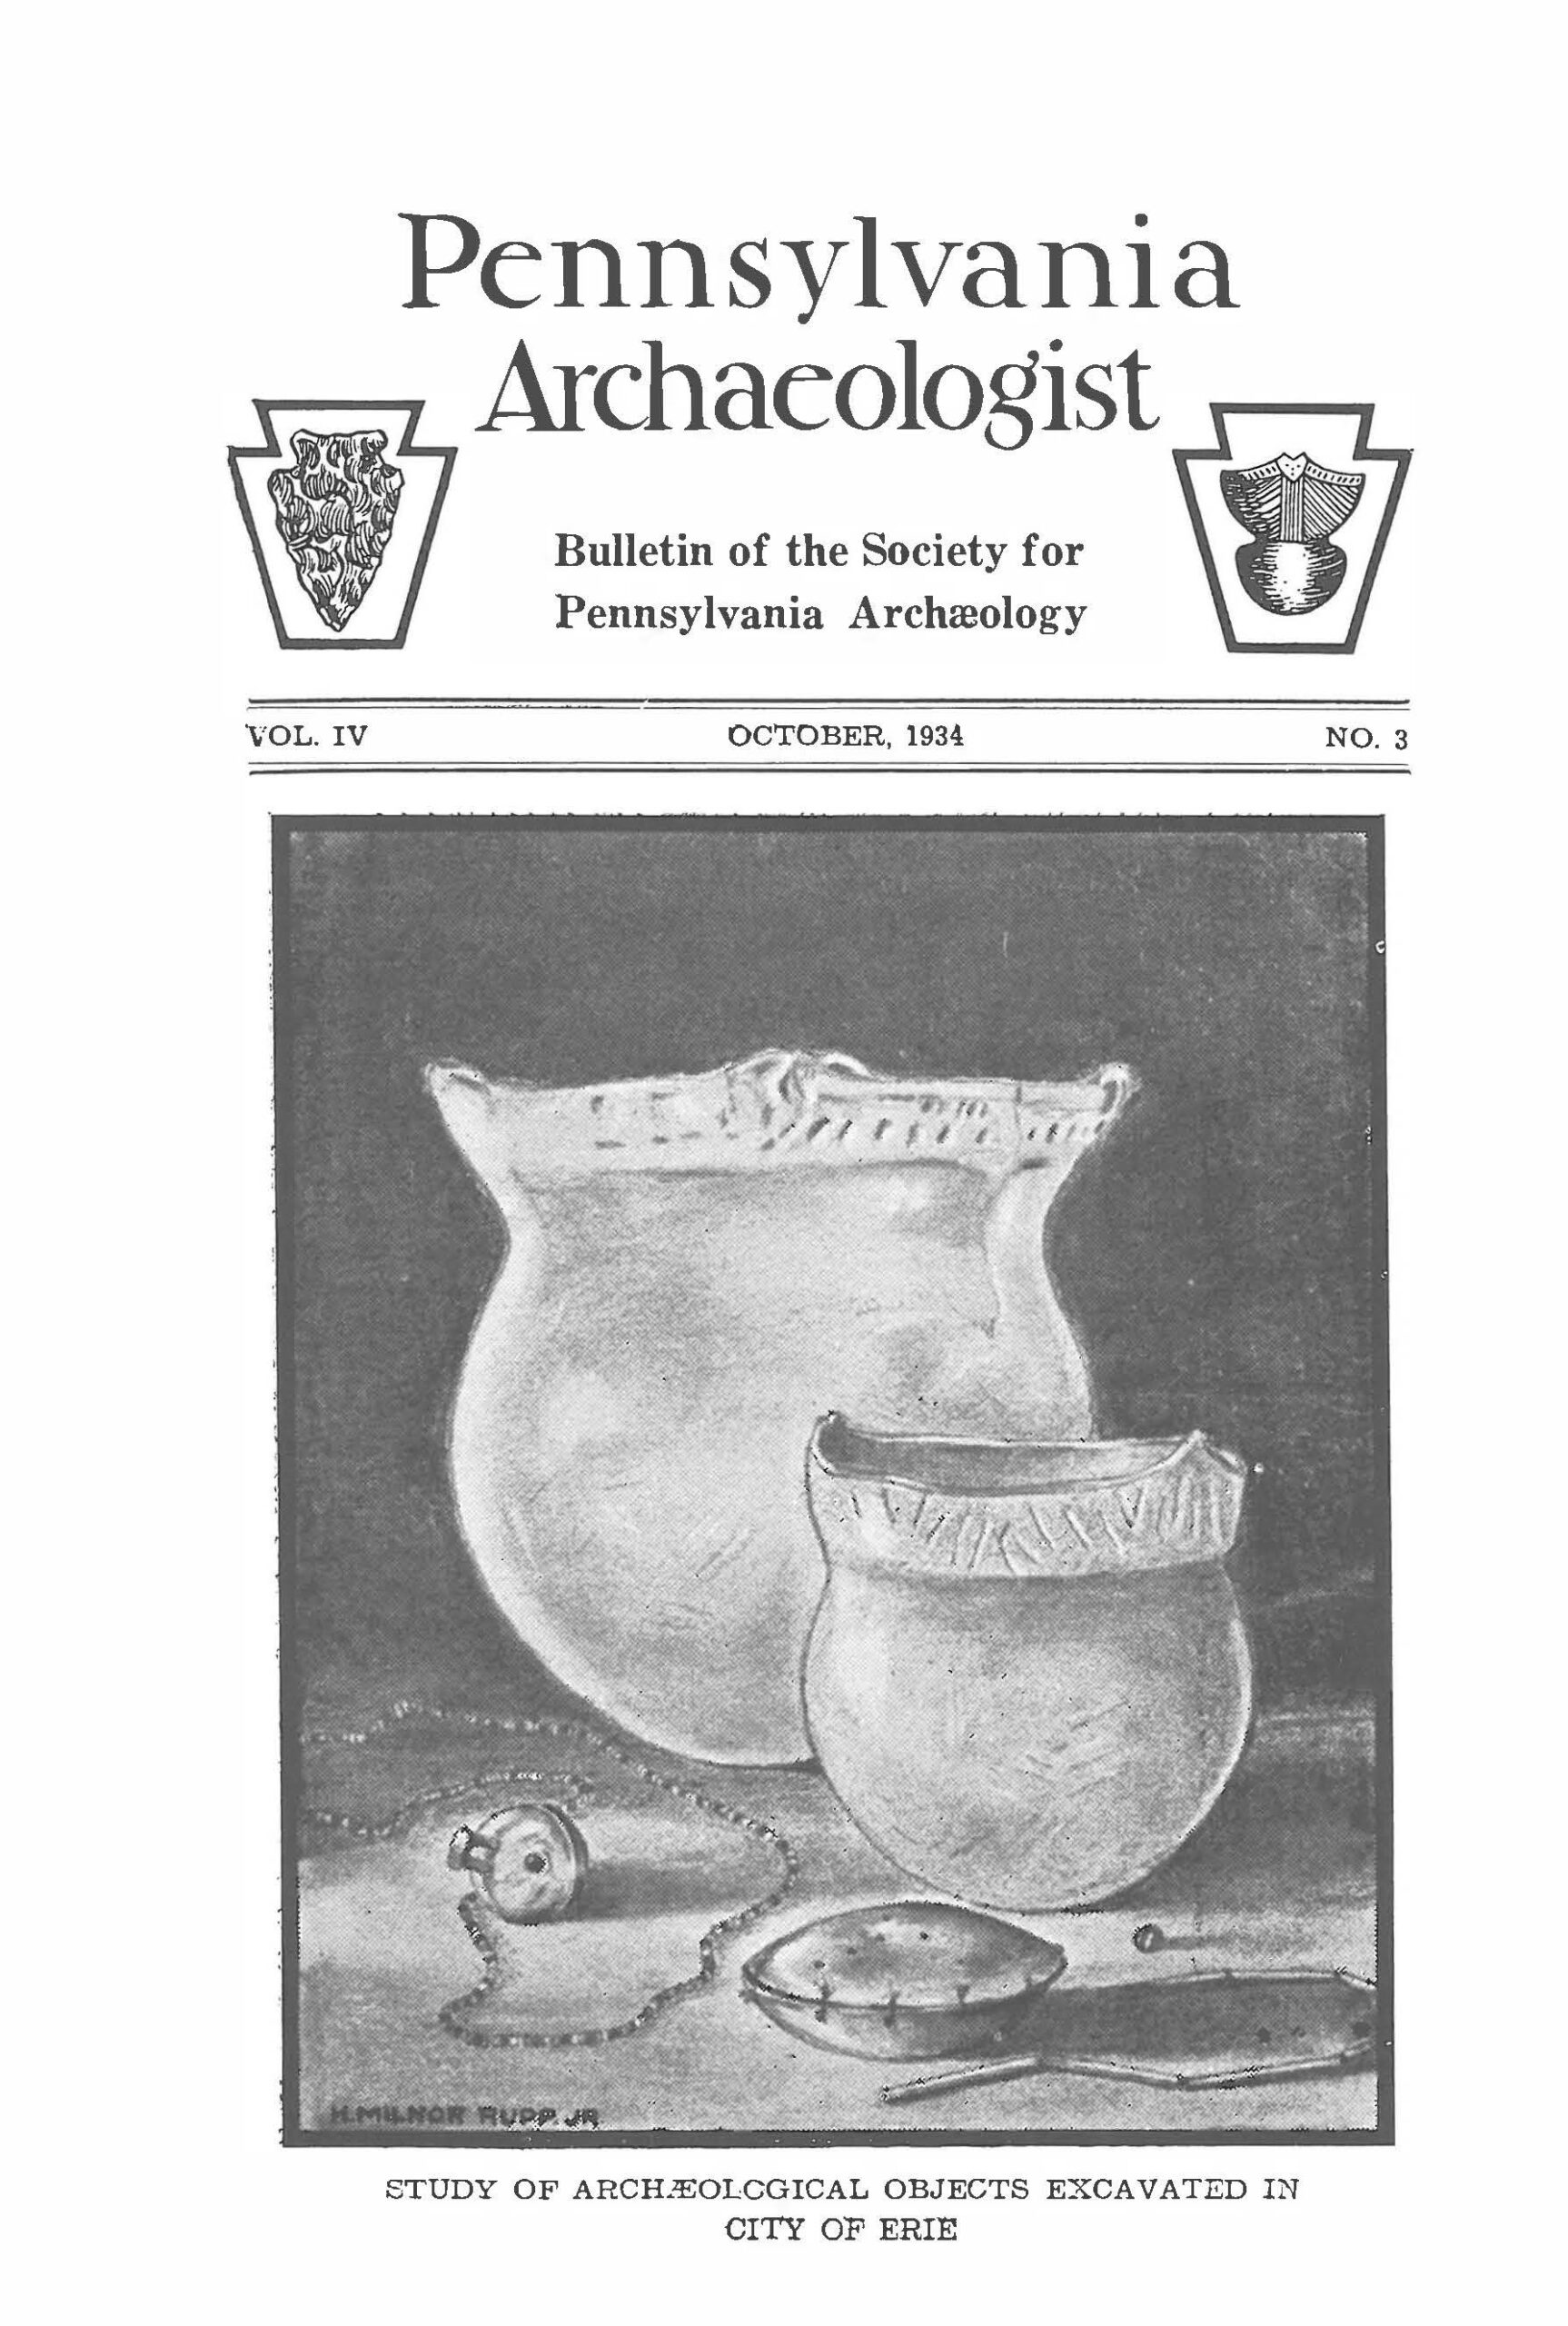 Cover of a publication that says "Pennsylvania Archaeologist" and features a hand drawing of various objects.